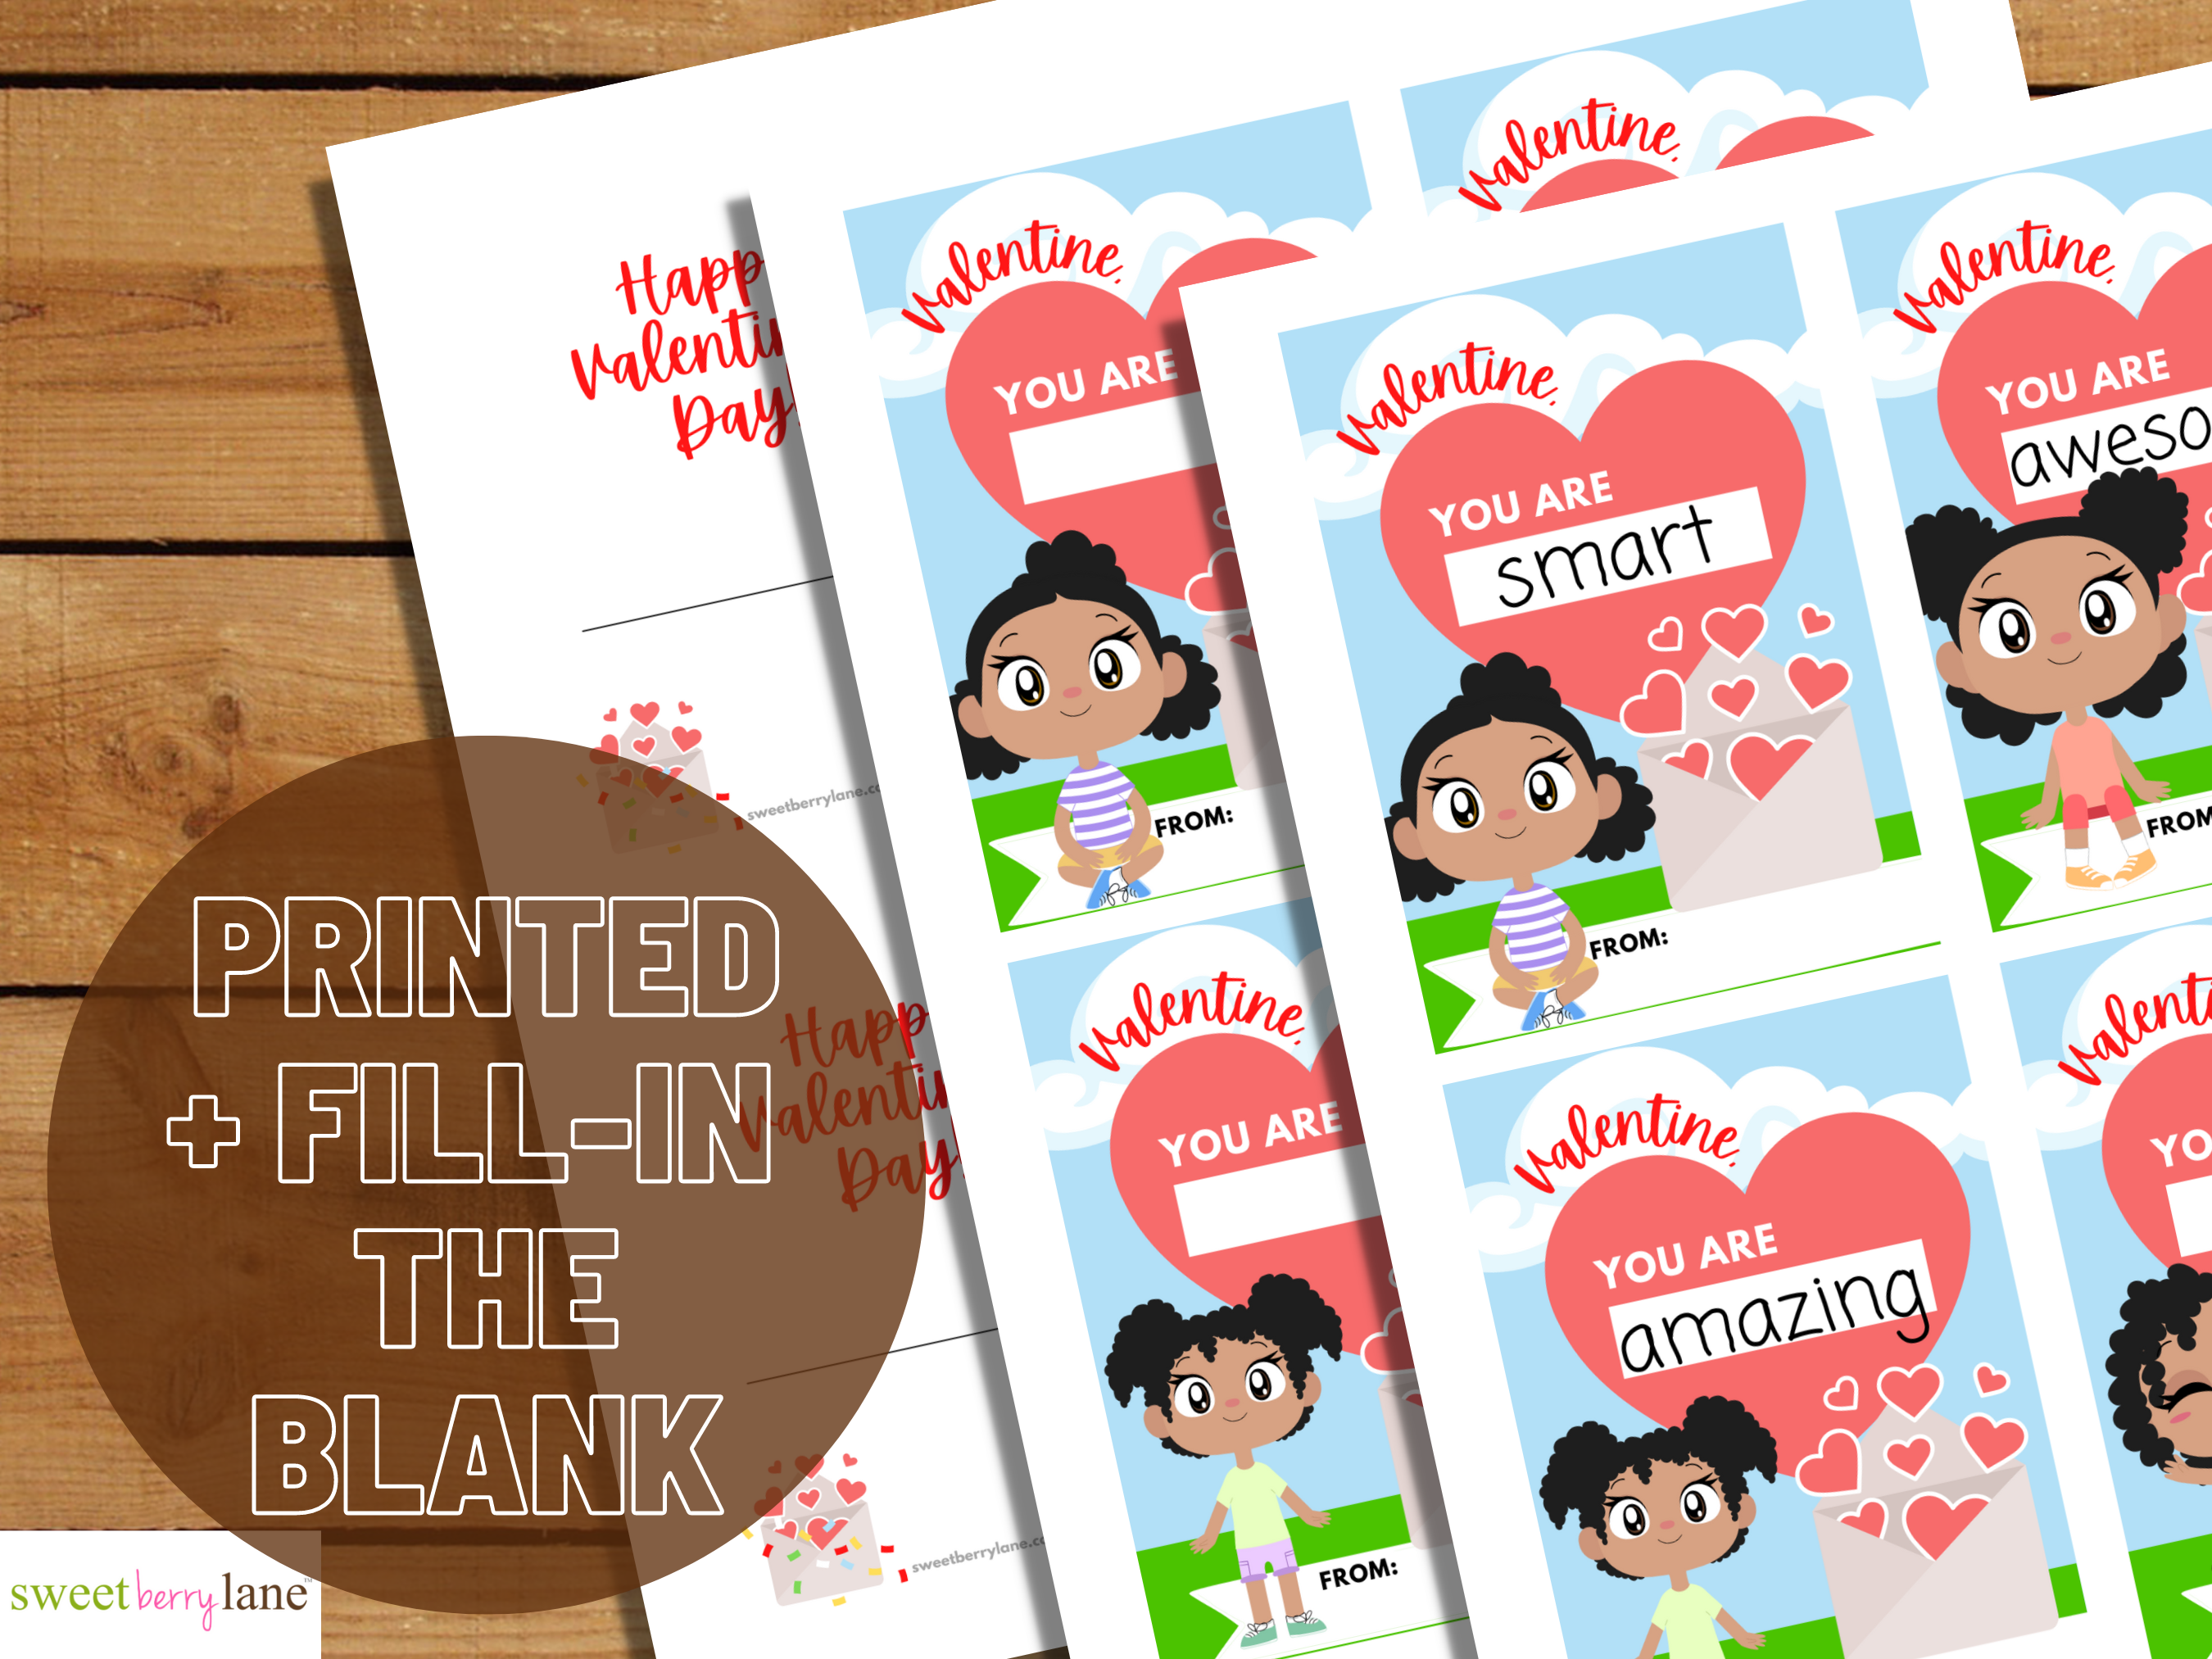 Positive Affirmations for black girls - School Valentines Day Cards